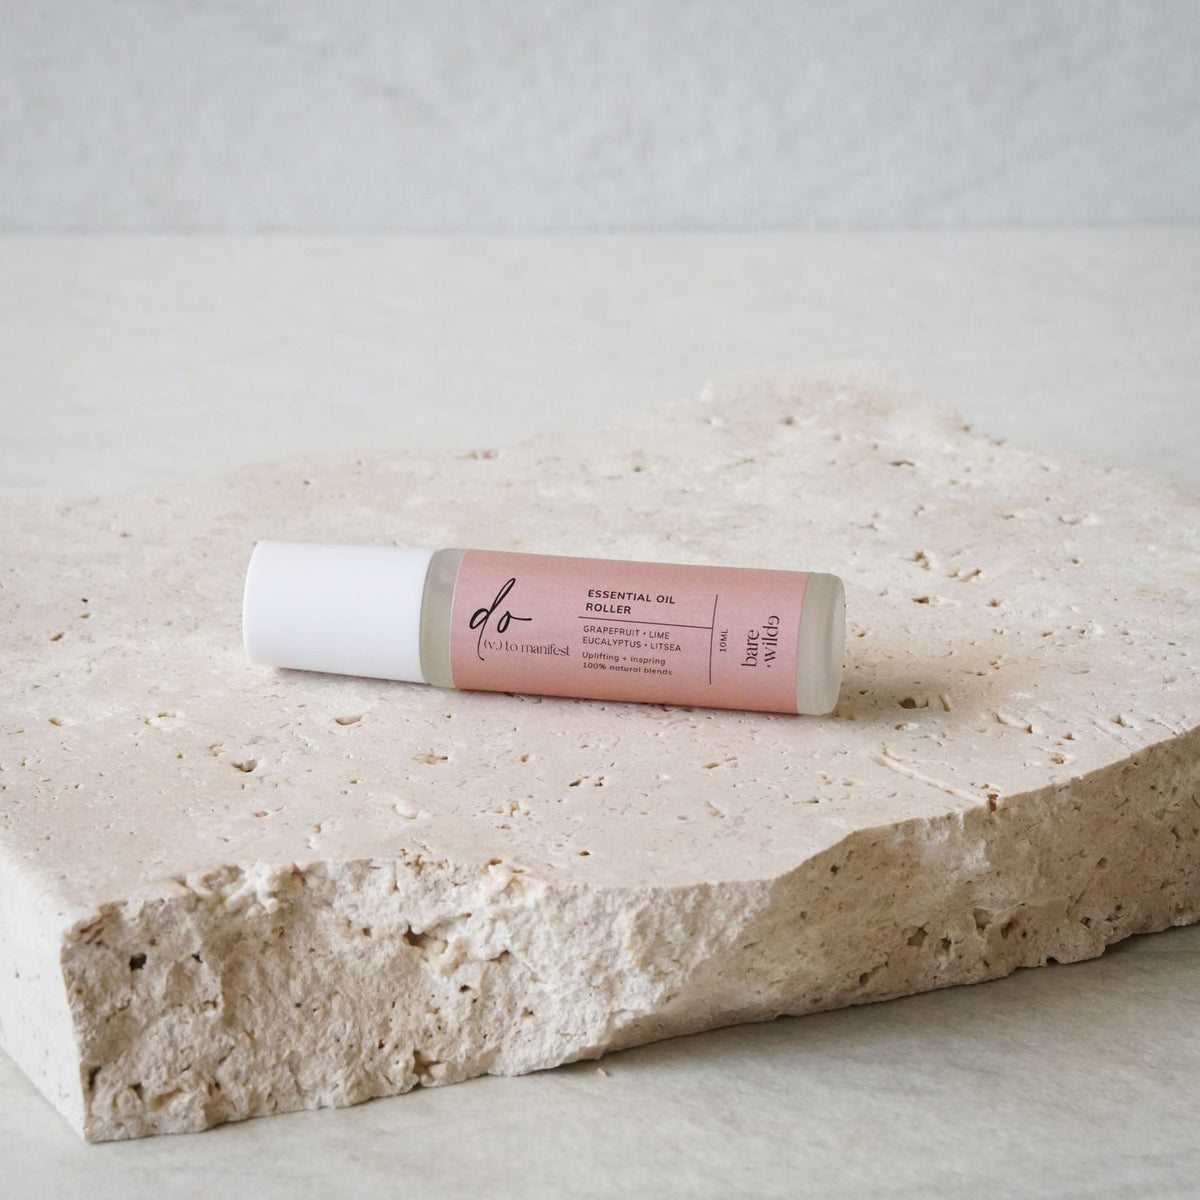 uplifting natural oil roller made with grapefruit, lime, eucalyptus and litsea essential oils